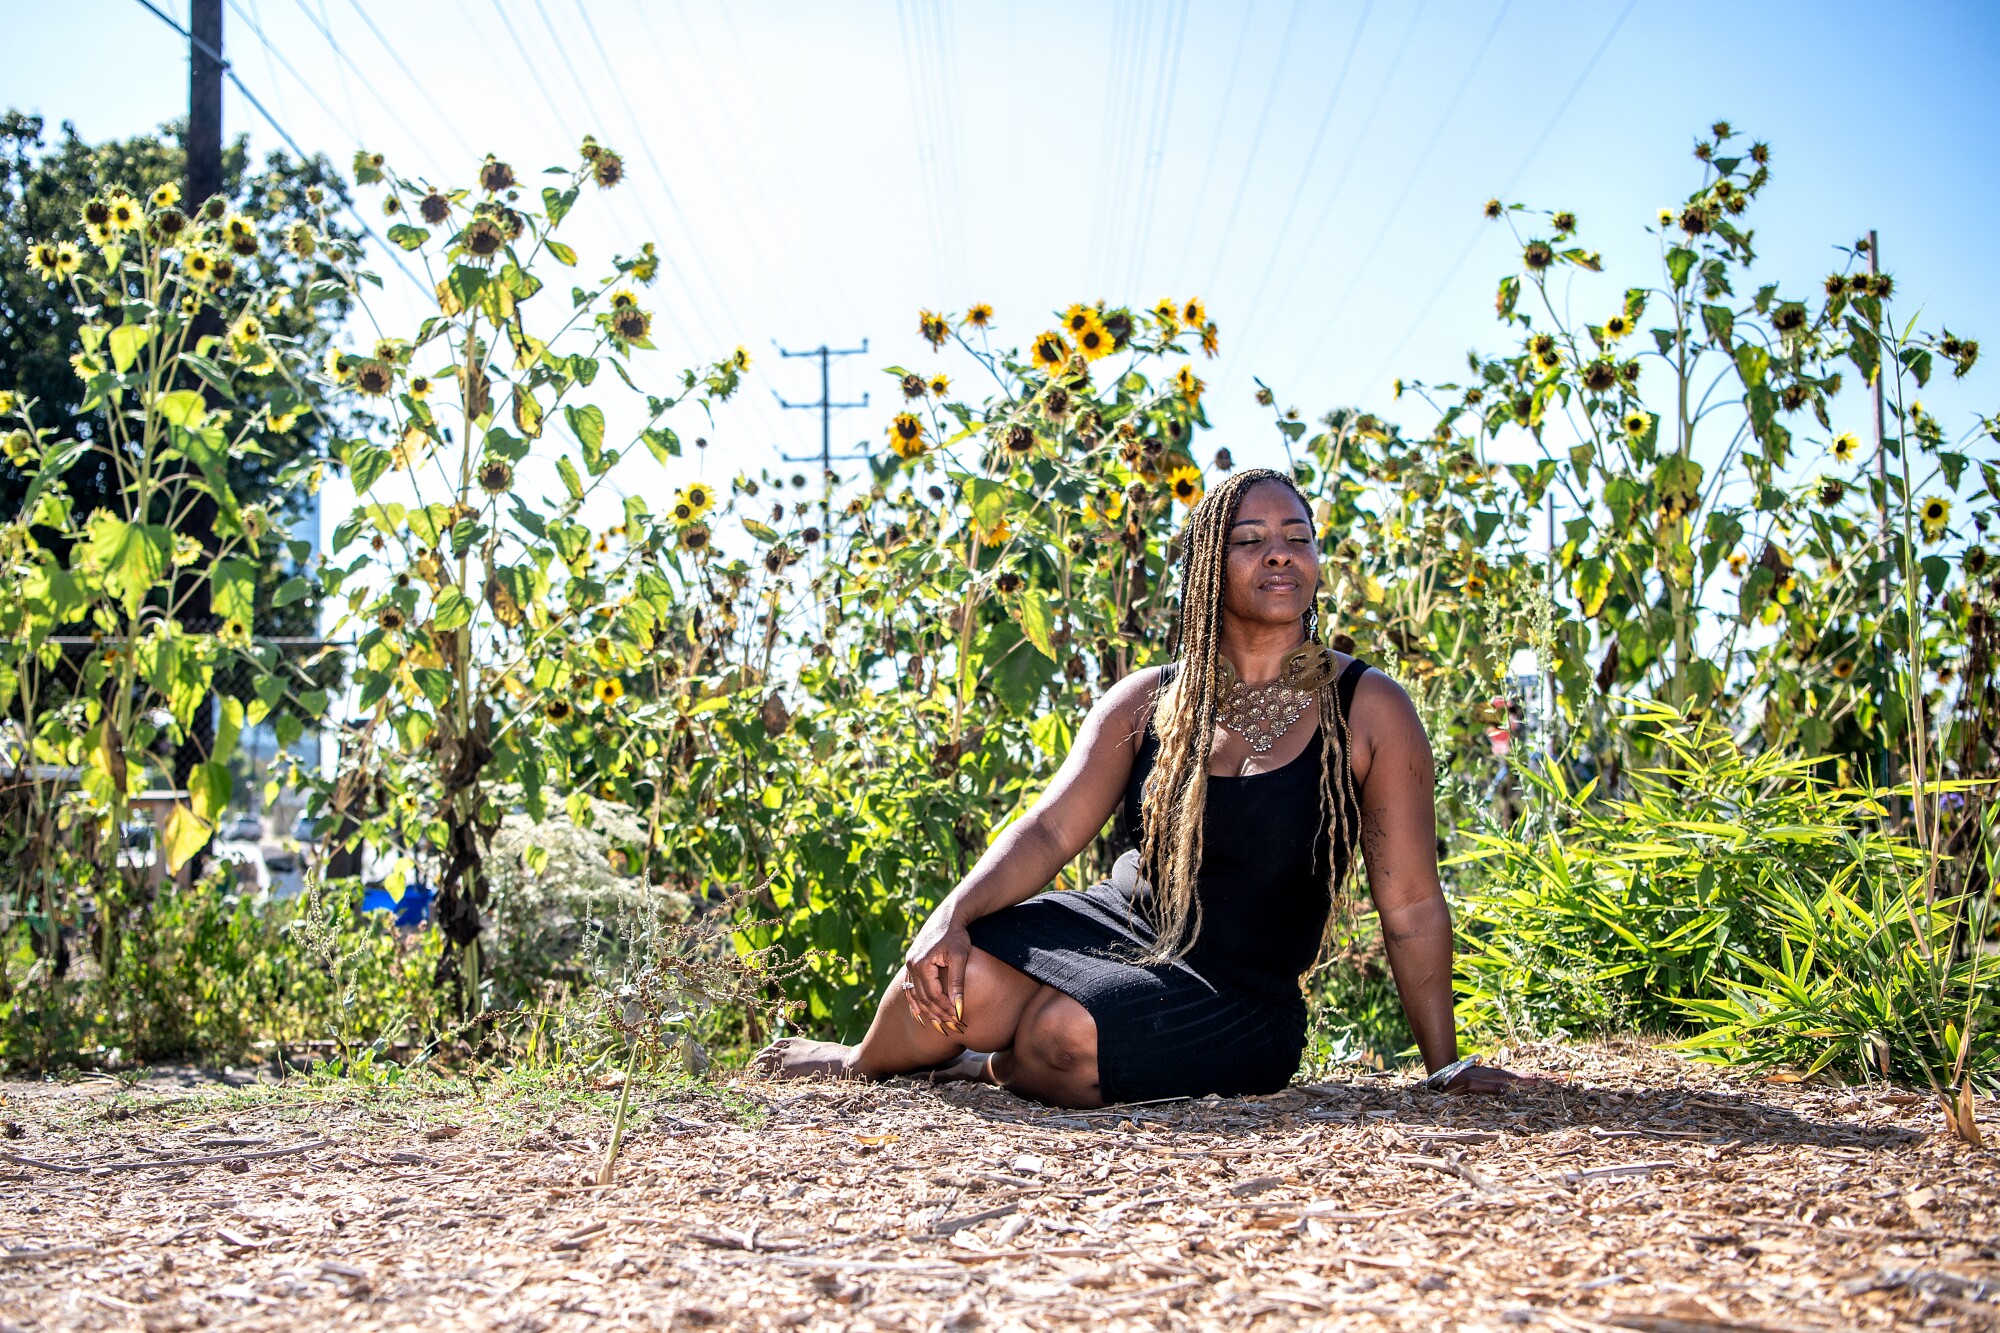 Jania Richardson sits on the ground in a garden surrounded by sunflowers.